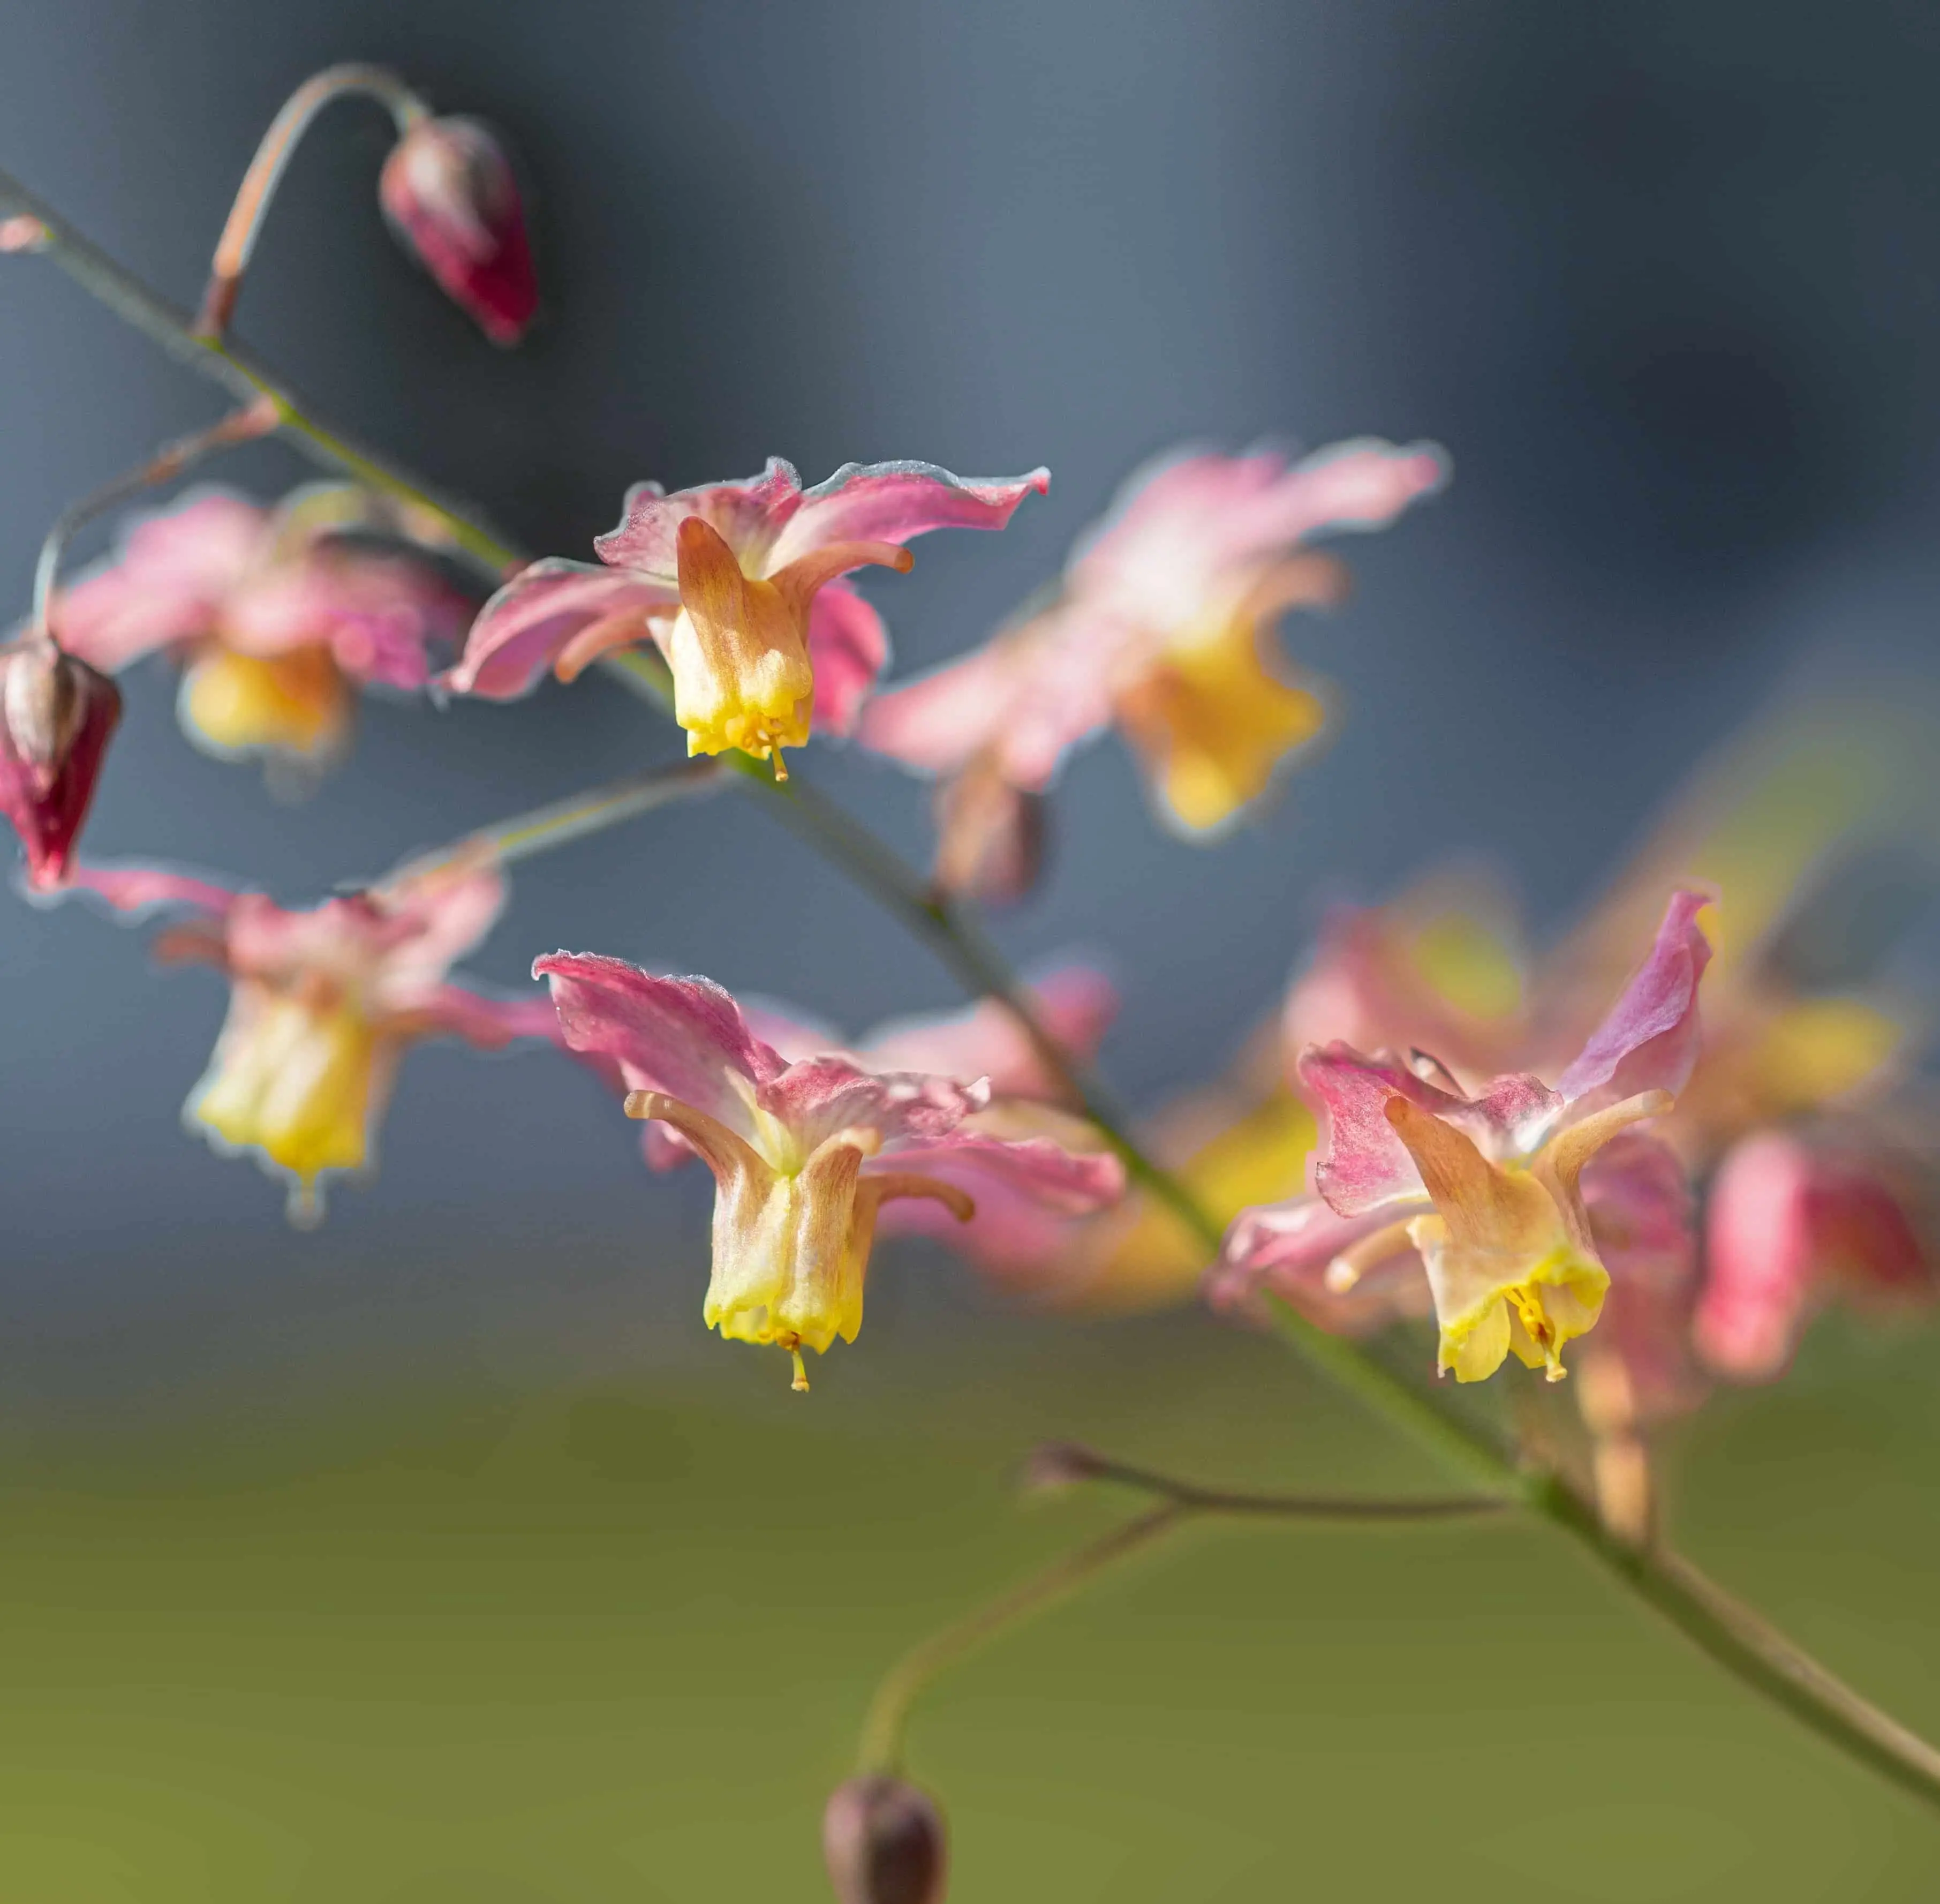 An image of a branch of Epimedium (horny goat weed)